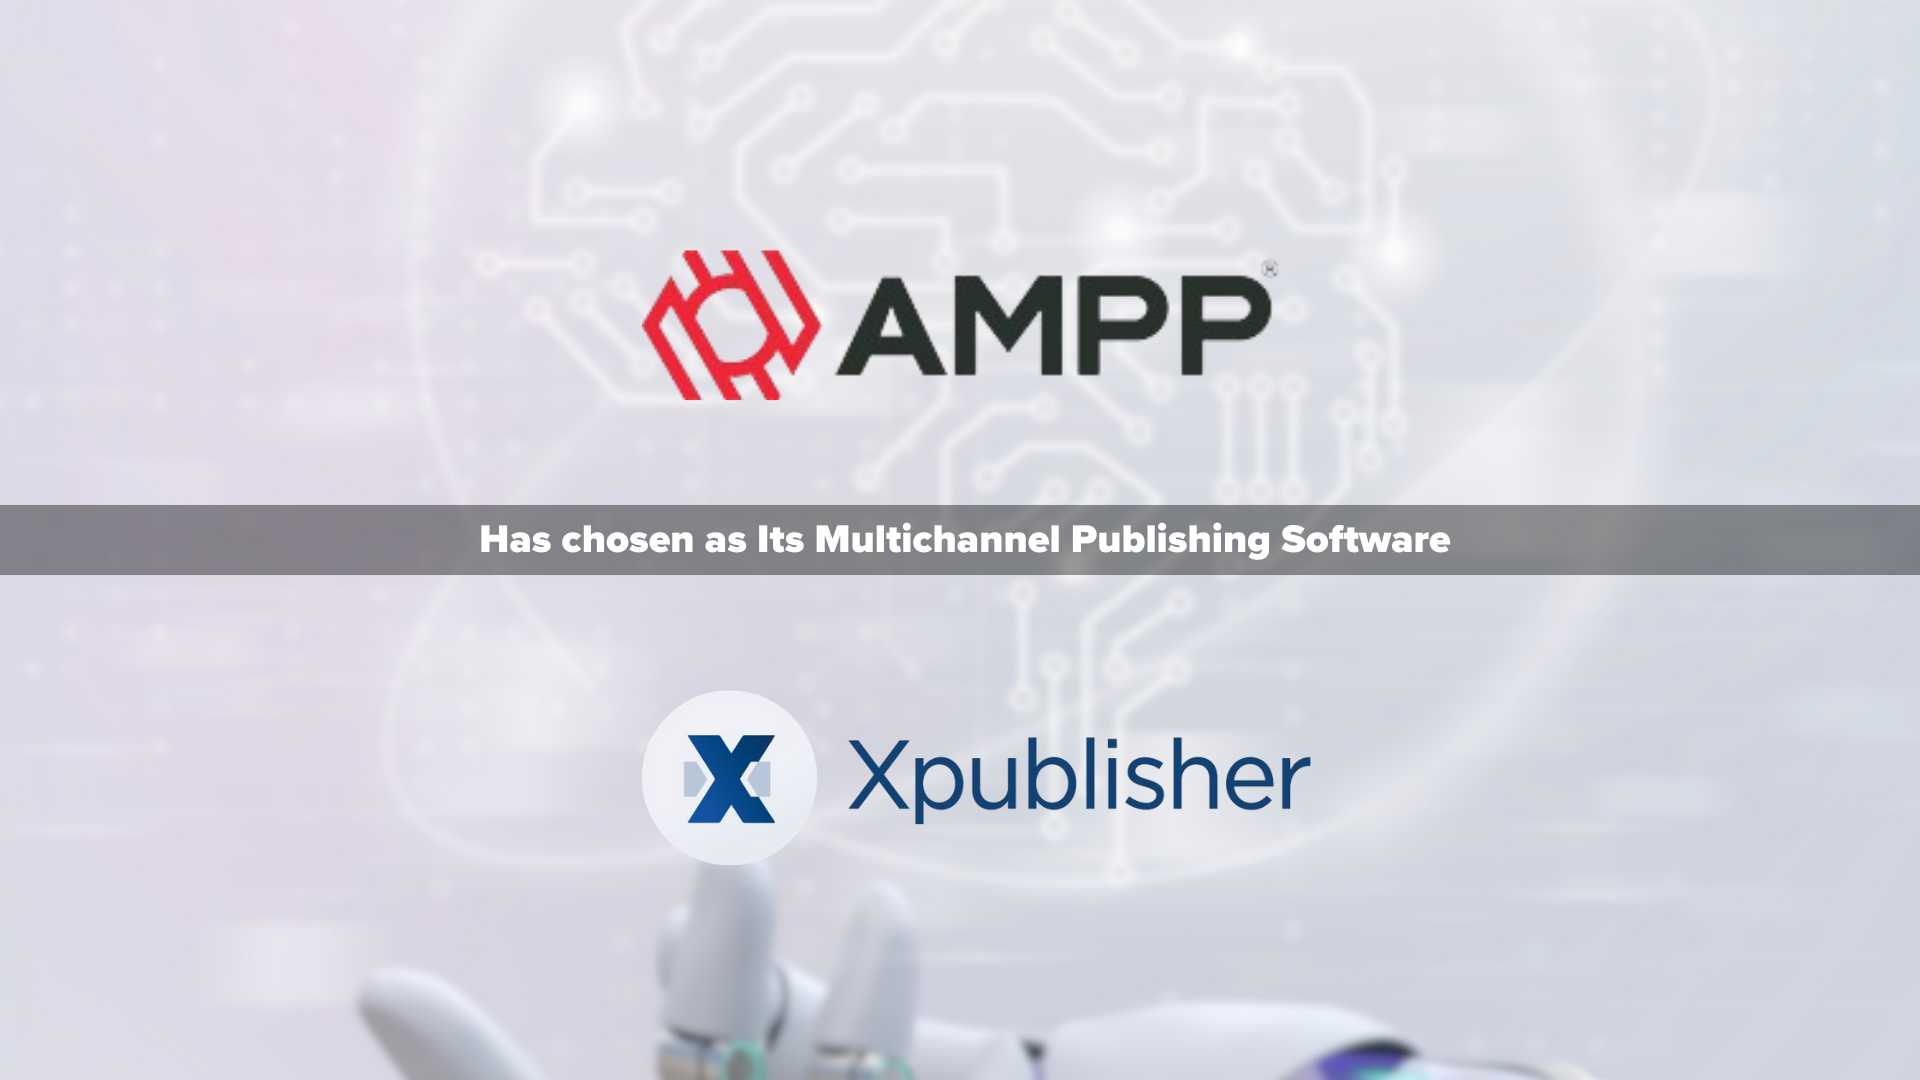 AMPP paves the way for efficiency through process automation with Xpublisher